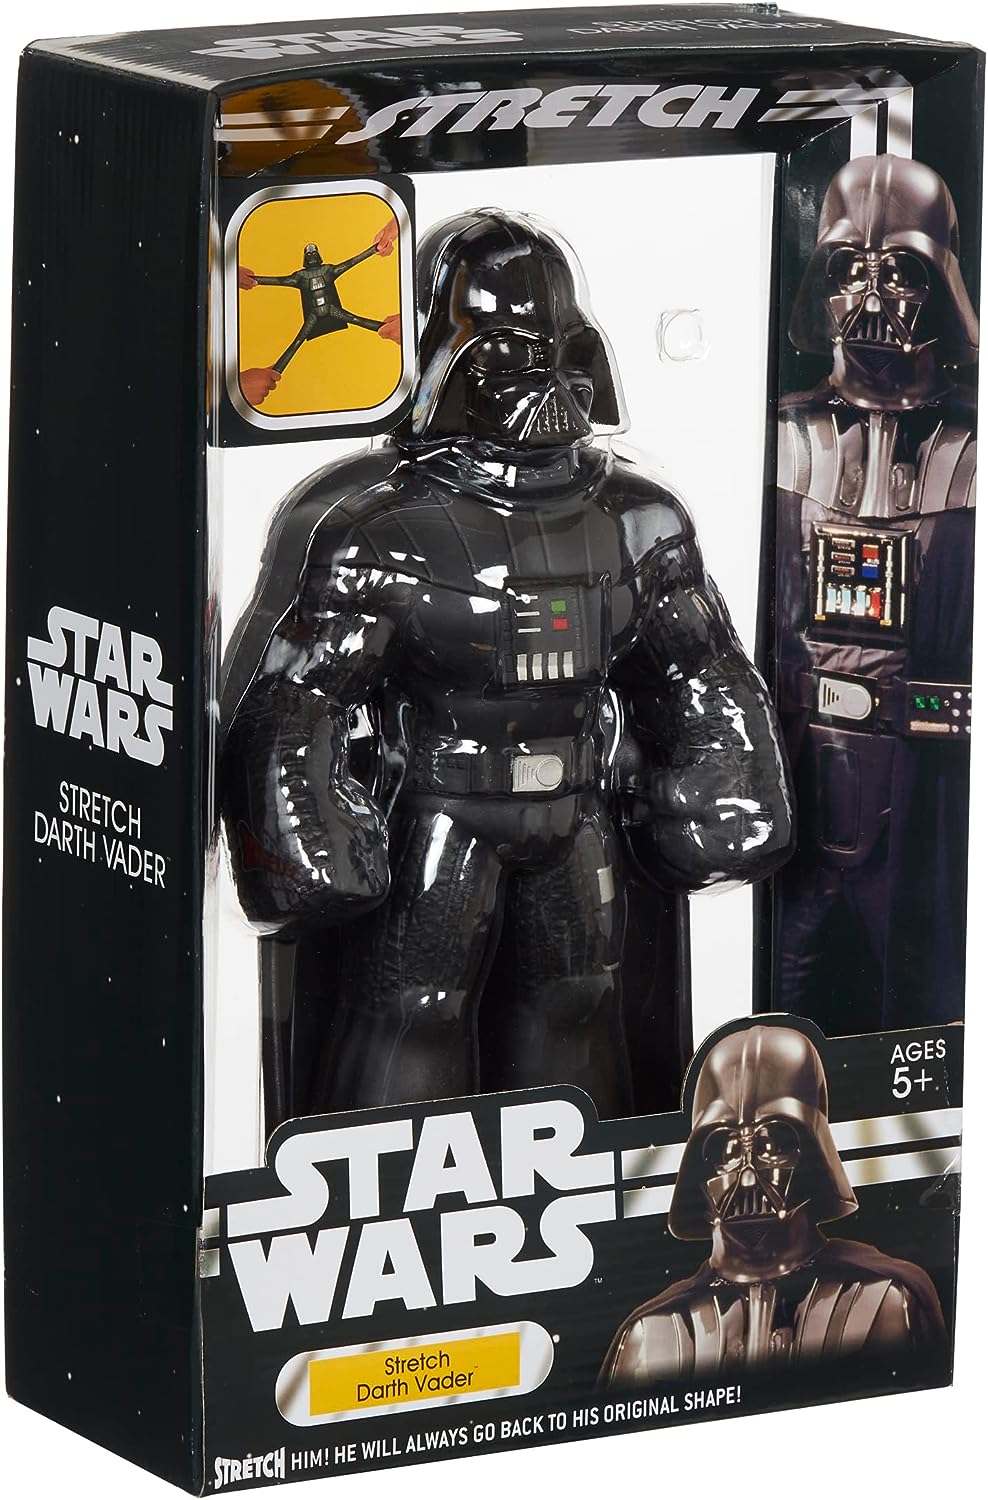 STAR WARS LARGE DARTH VADER STRETCH TOY, STRETCH ARMSTRONG, AMAZING STRETCHY FUN